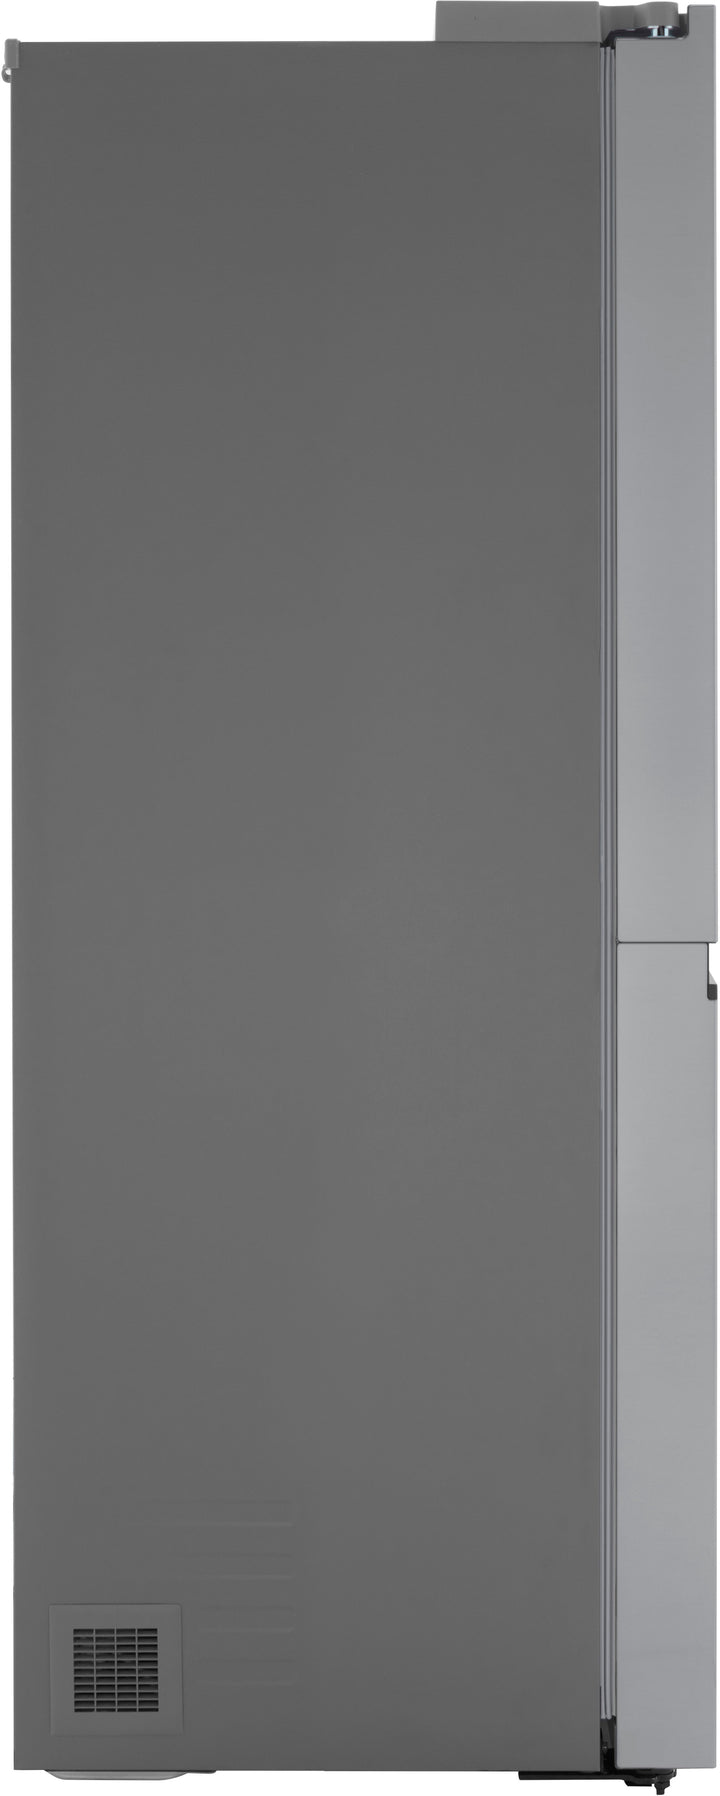 LG - 23 Cu. Ft. Side-by-Side Counter-Depth Refrigerator with Smooth Touch Dispenser - Stainless steel_20